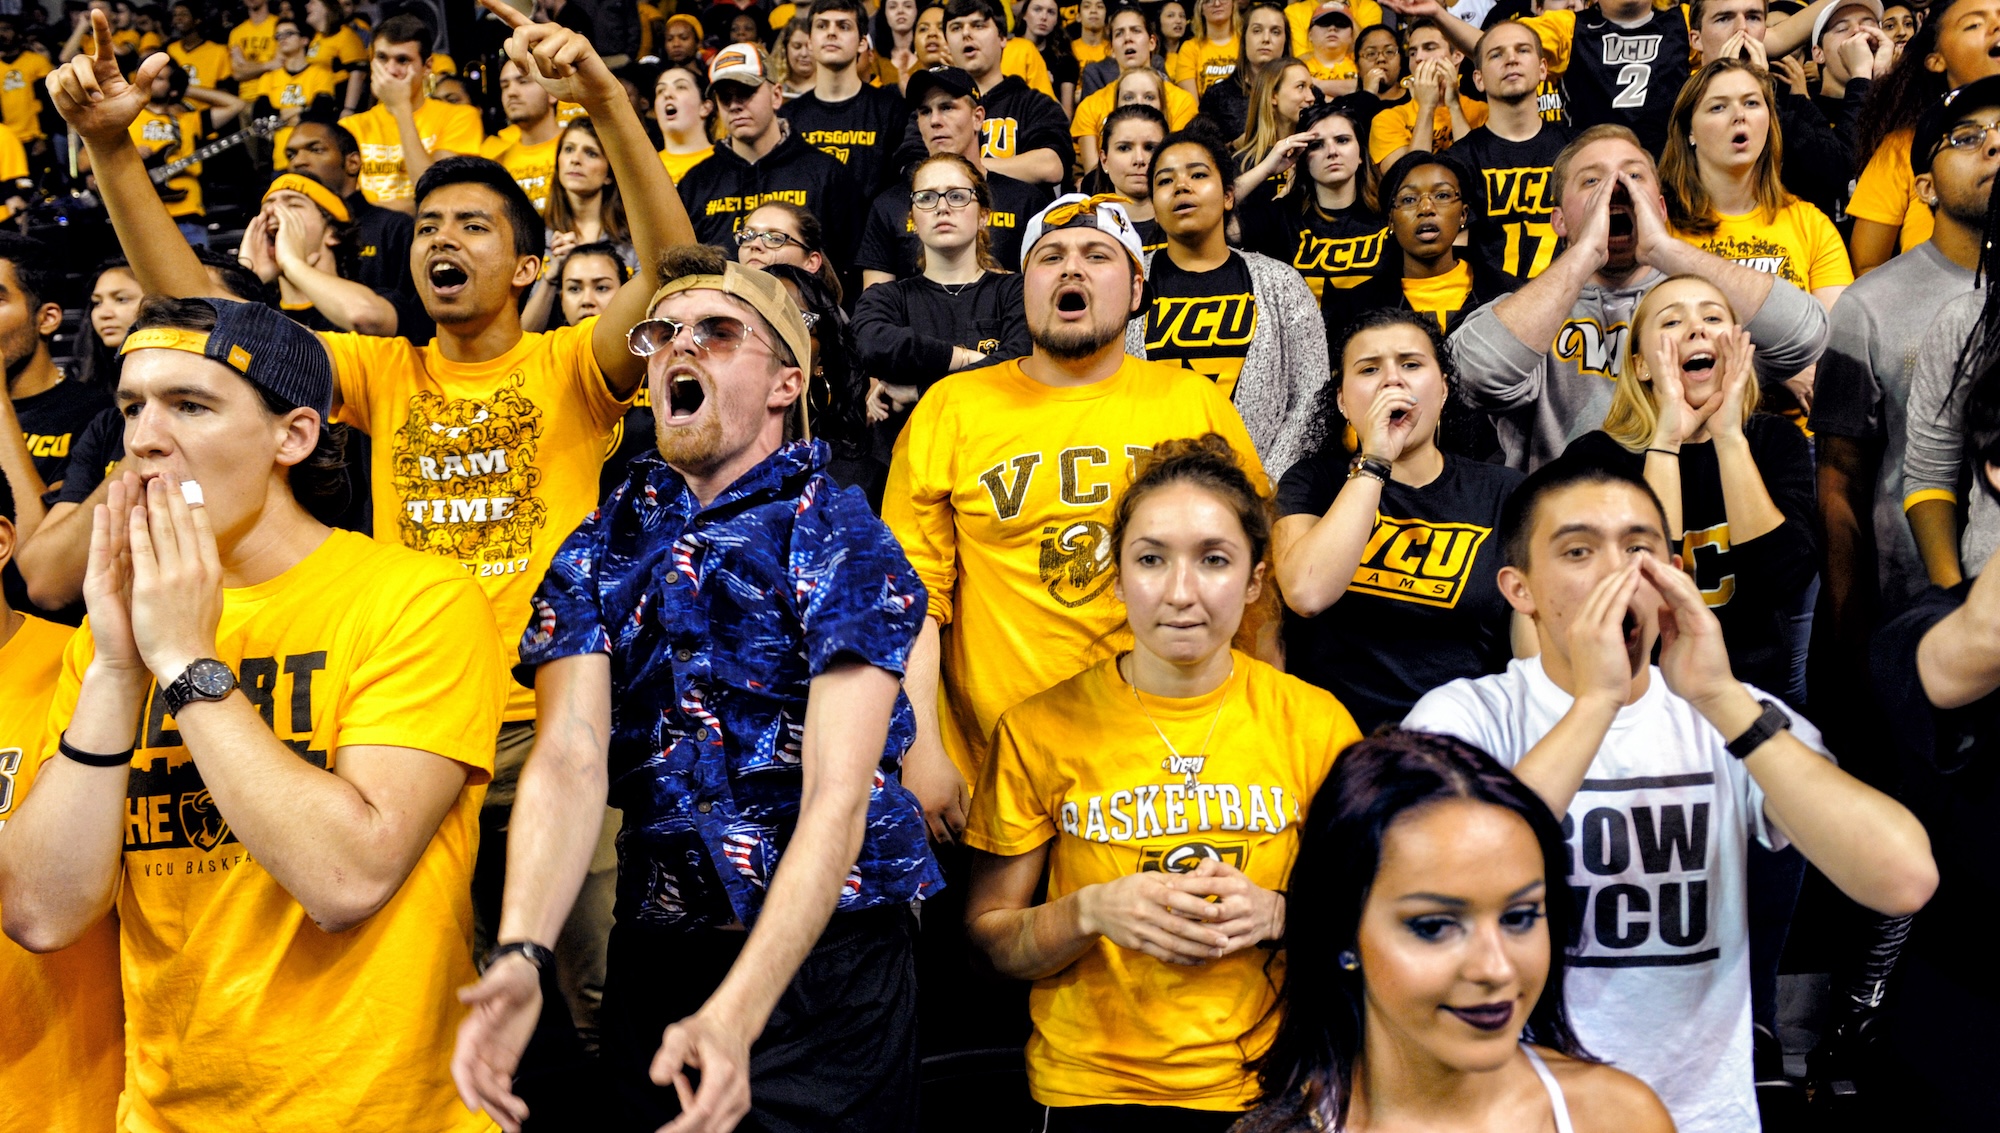 VCU fans at a basketball game